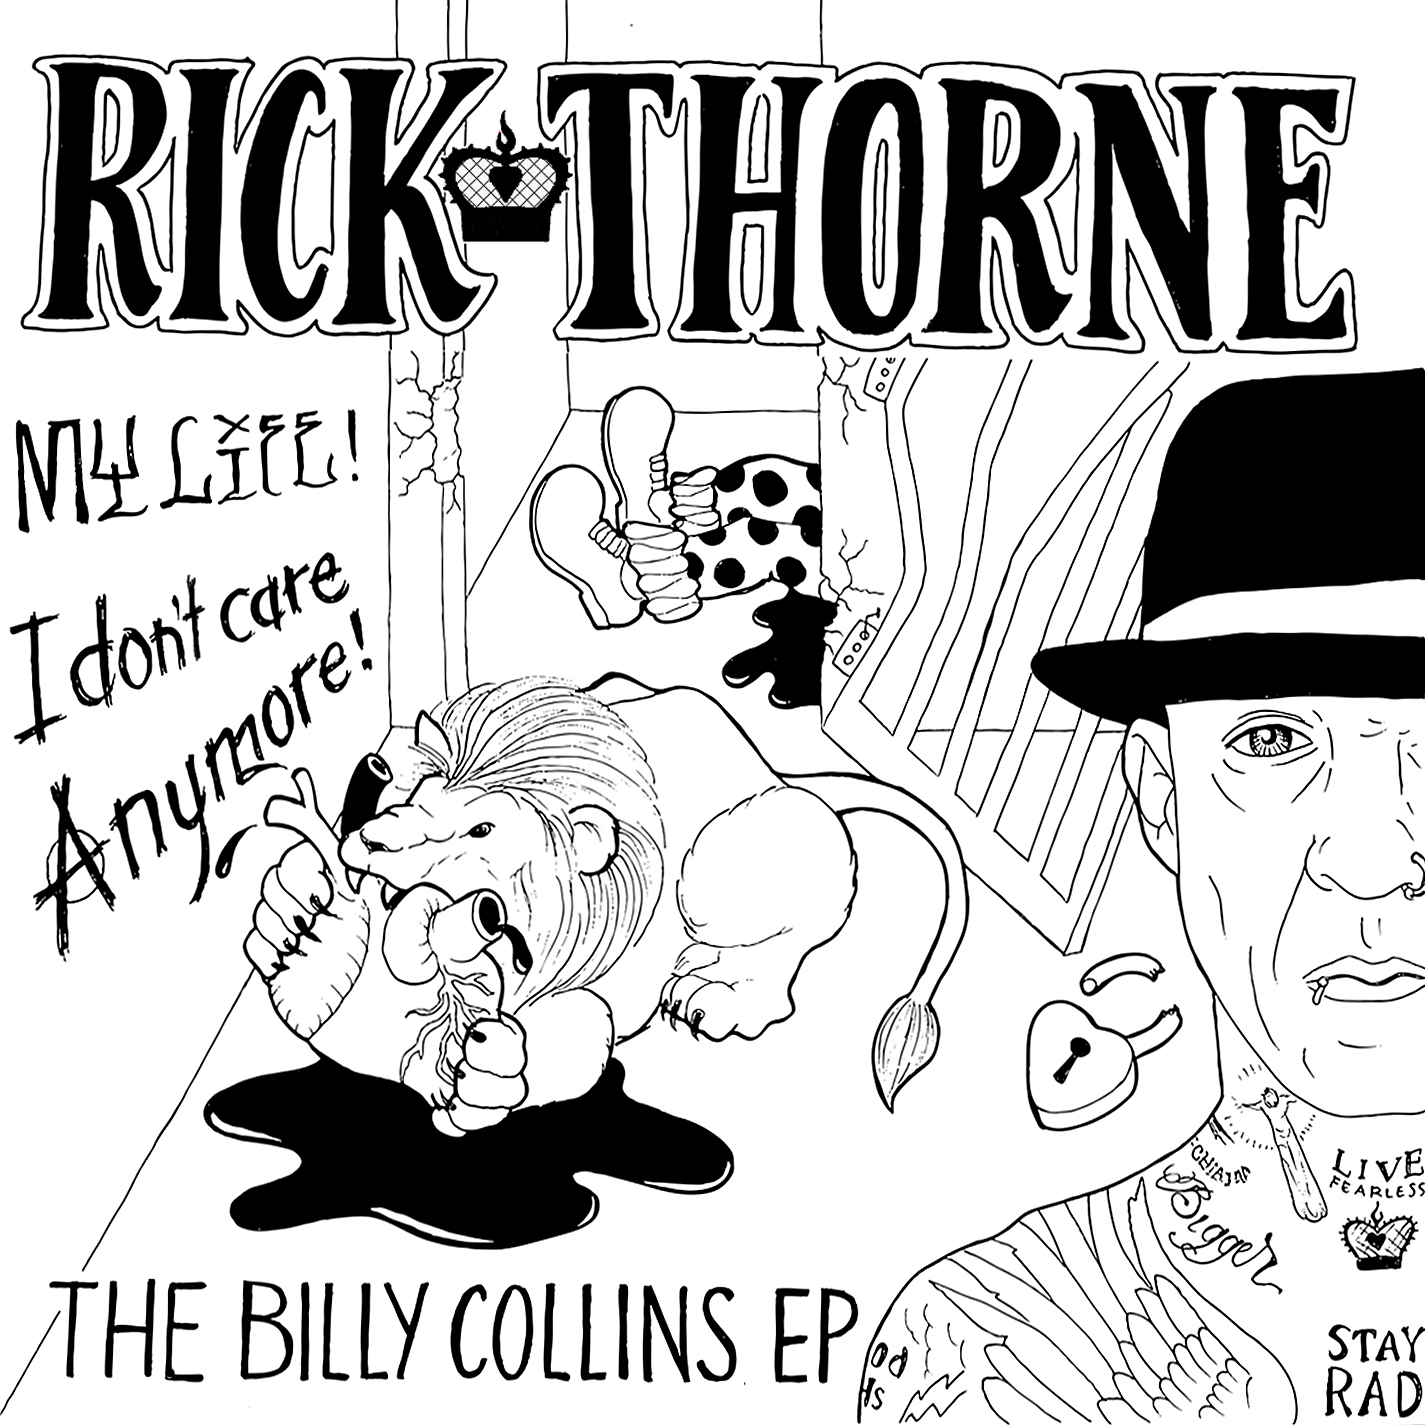 The Billy Collins EP